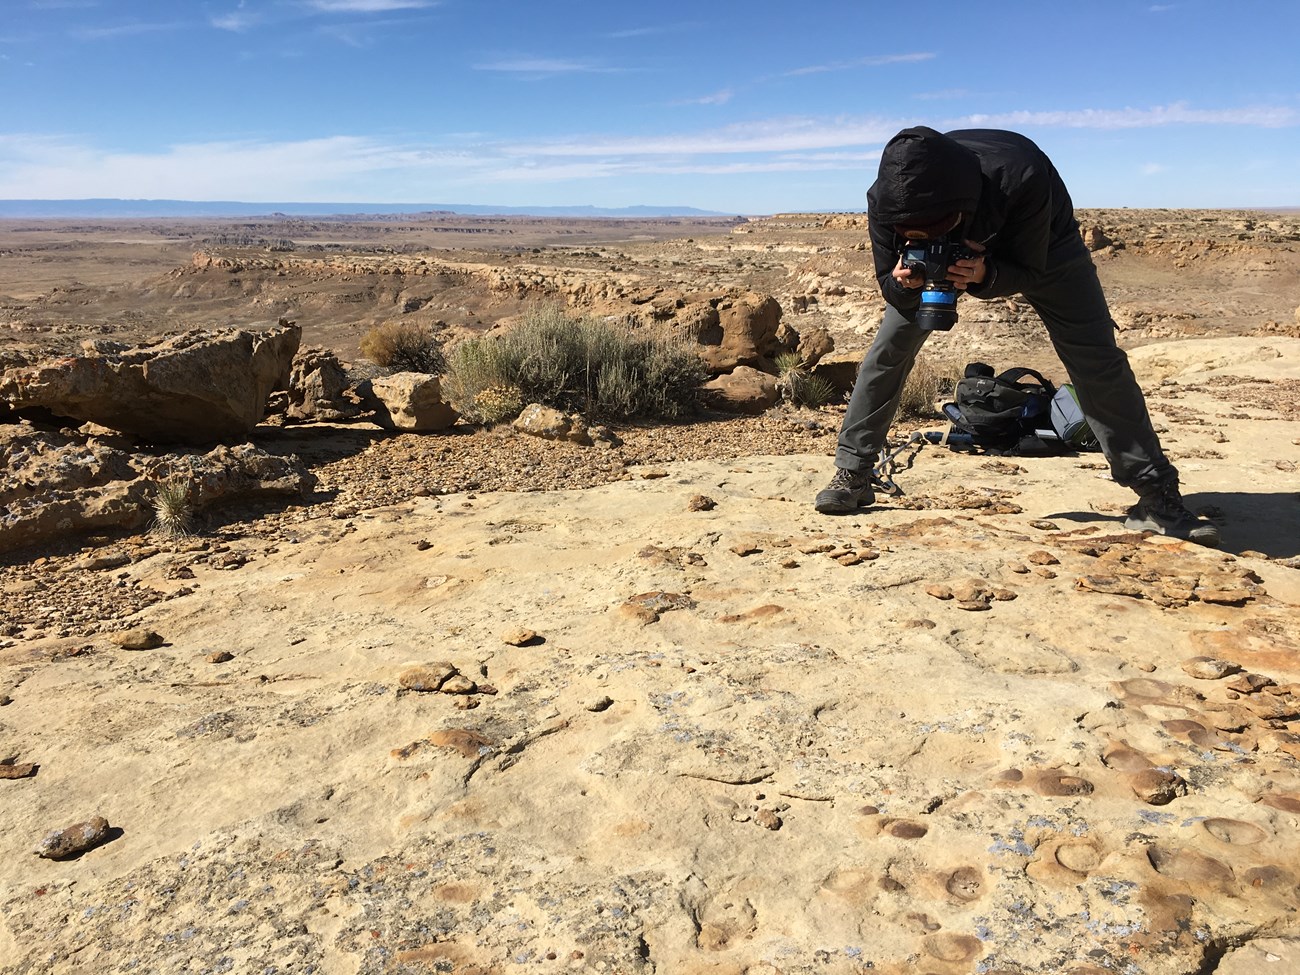 On a sandstone mesa, a person bends over while taking a picture of a fossil on the ground.